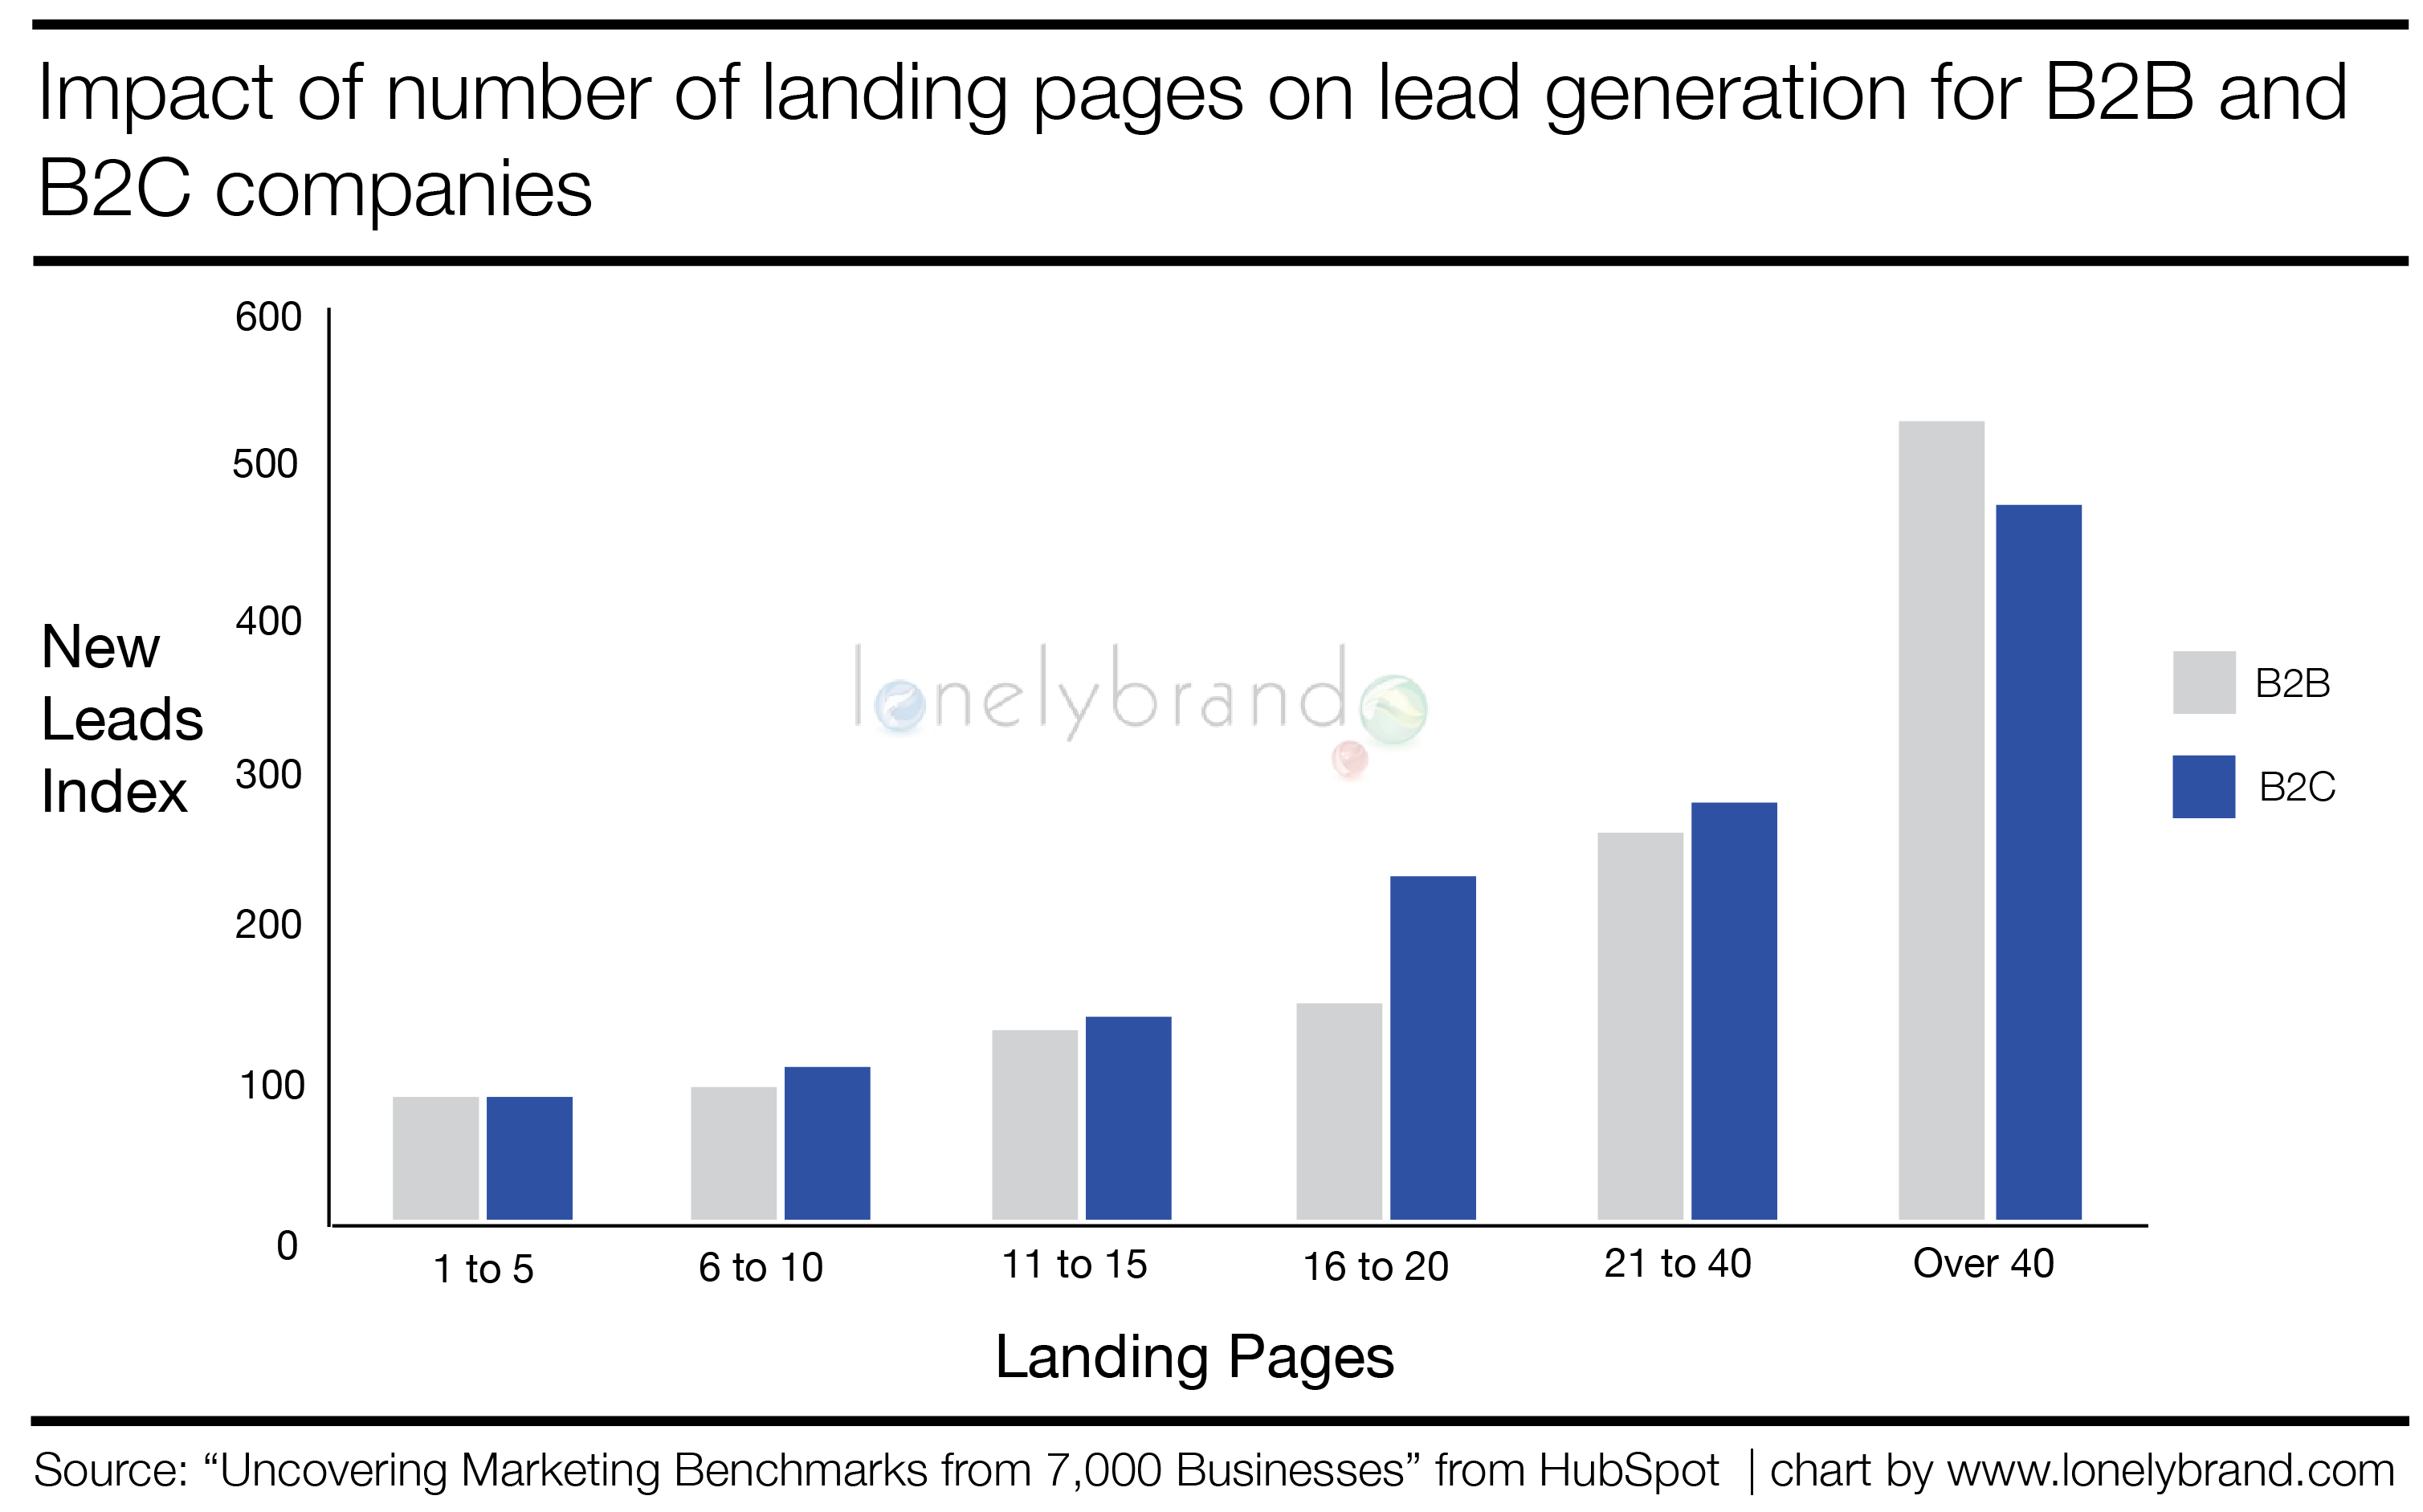 How Many Landing Pages?